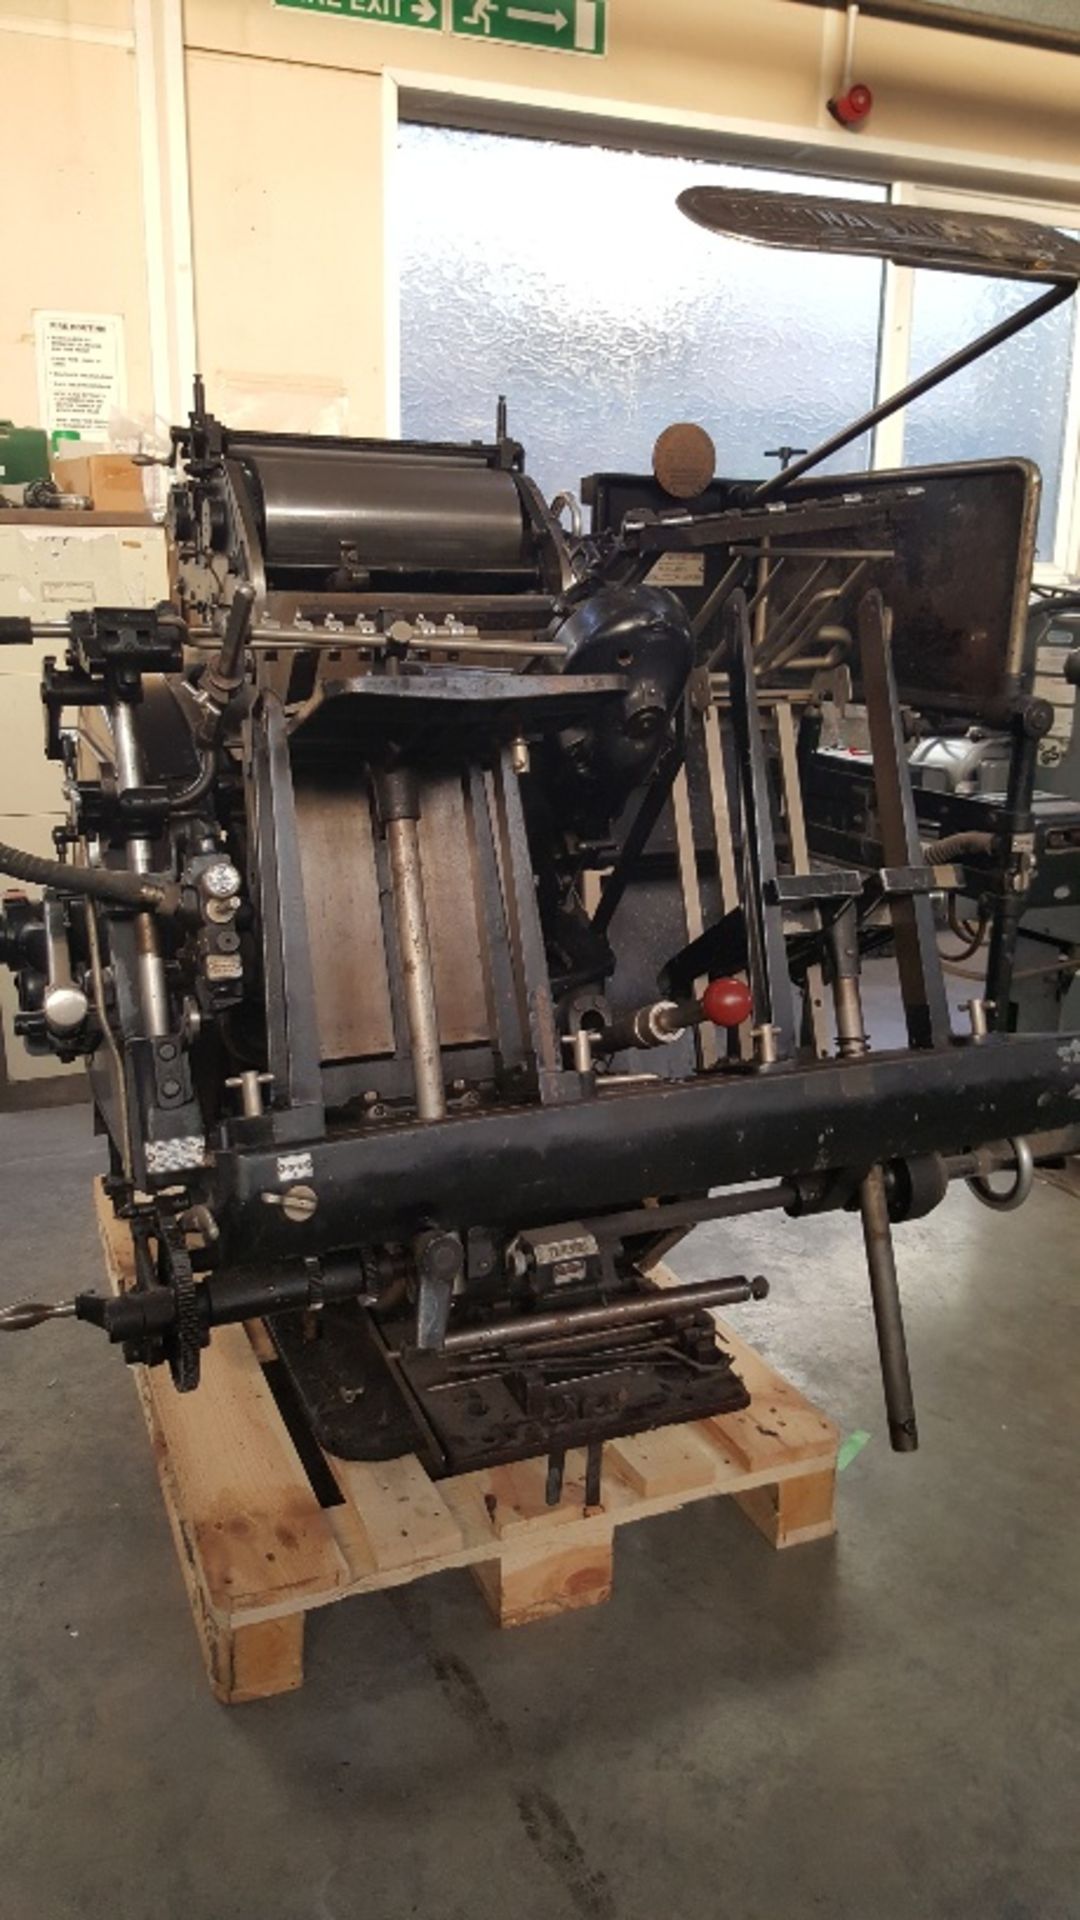 Heidelberg T PLATEN PRESS, serial no. T134513E, year of manufacture 1961, red handle model with lock - Image 2 of 3